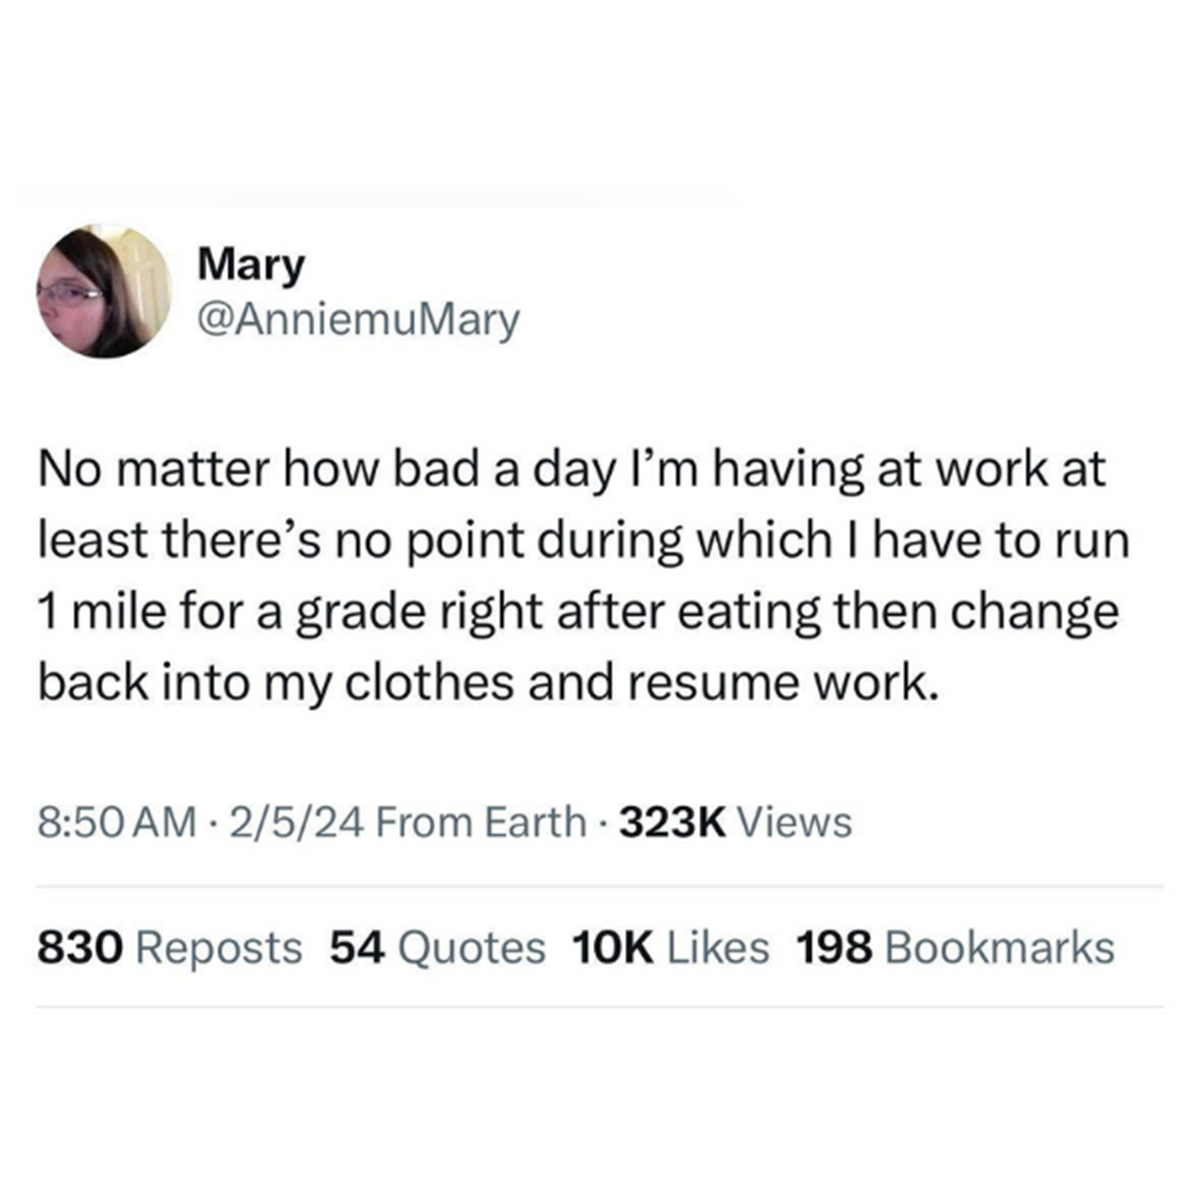 screenshot - Mary No matter how bad a day I'm having at work at least there's no point during which I have to run 1 mile for a grade right after eating then change back into my clothes and resume work. 2524 From Earth Views 830 Reposts 54 Quotes 10K 198 B